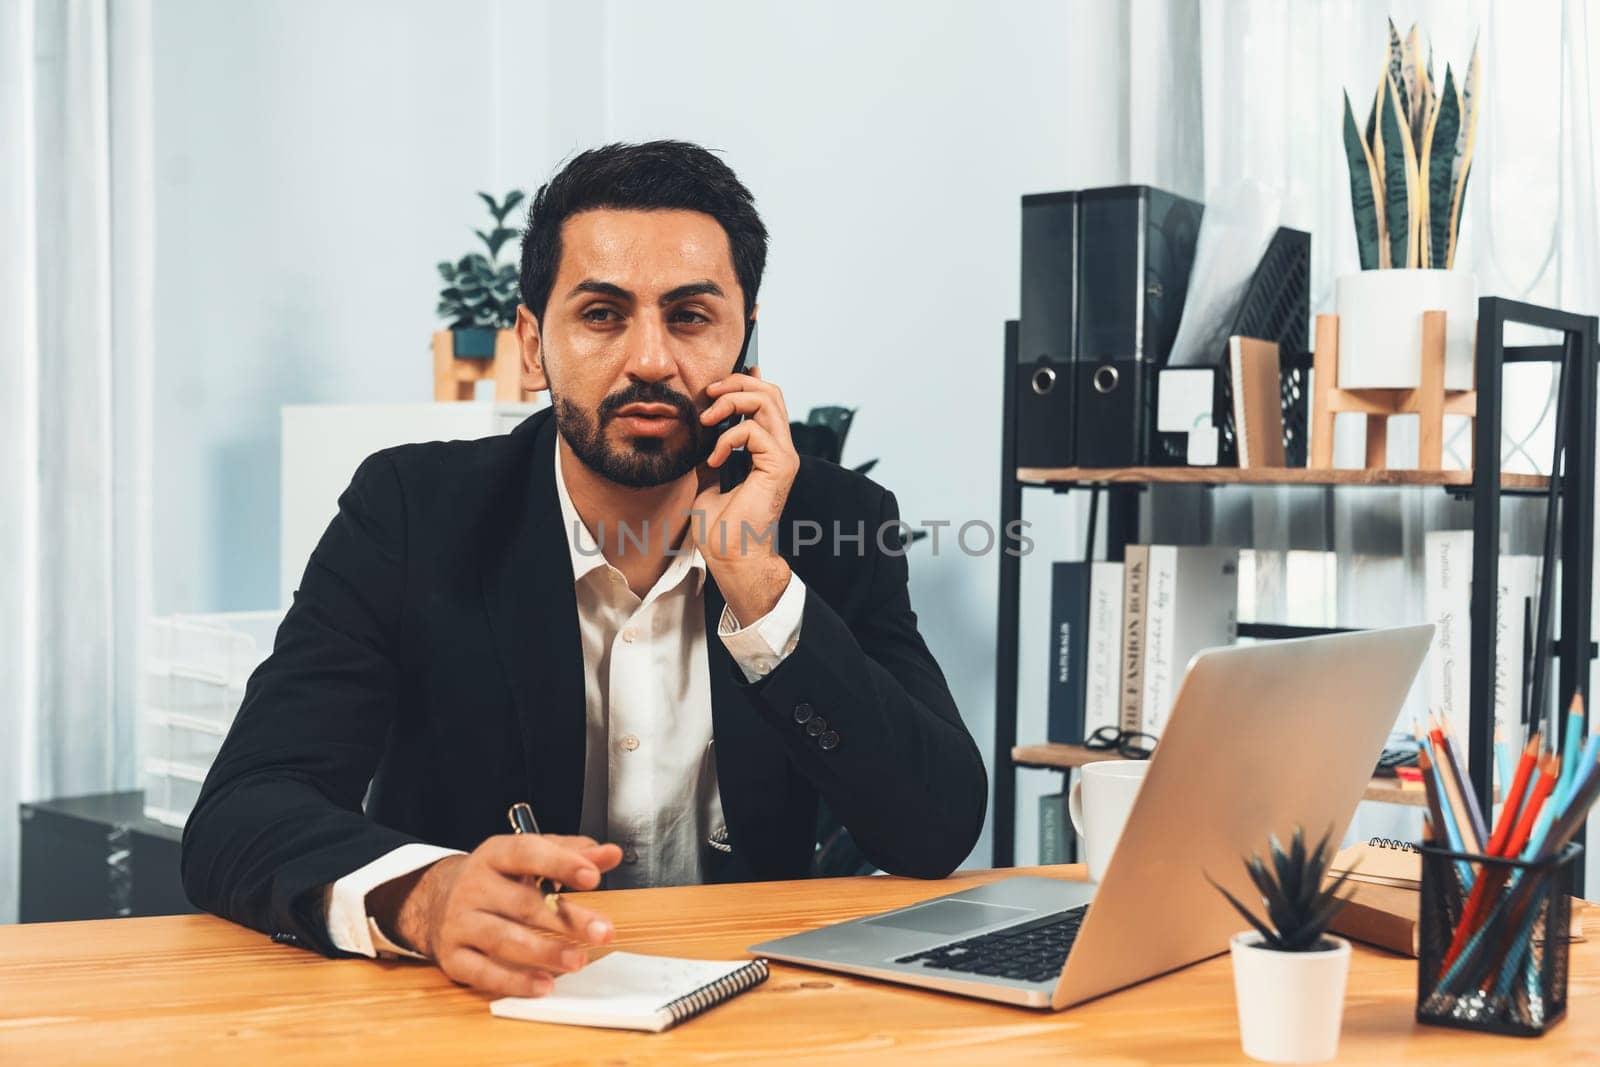 Diligent businessman busy talking on the phone call with clients while working with laptop in his office desk as concept of modern hardworking office worker lifestyle with mobile phone. Fervent